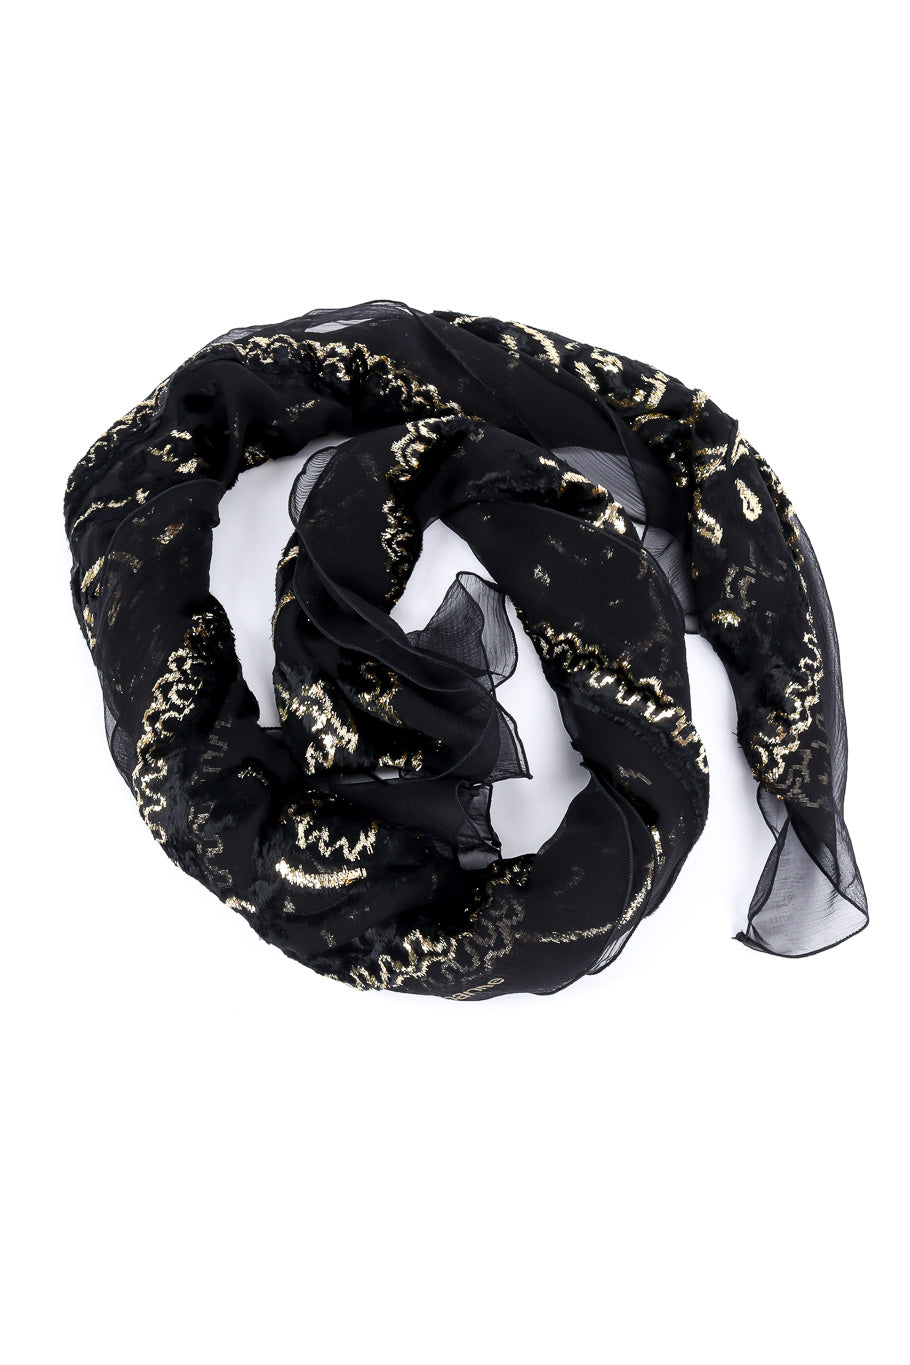 Chiffon velvet lamé scarf by Paco Rabanne flat lay wrapped in circle @recessla